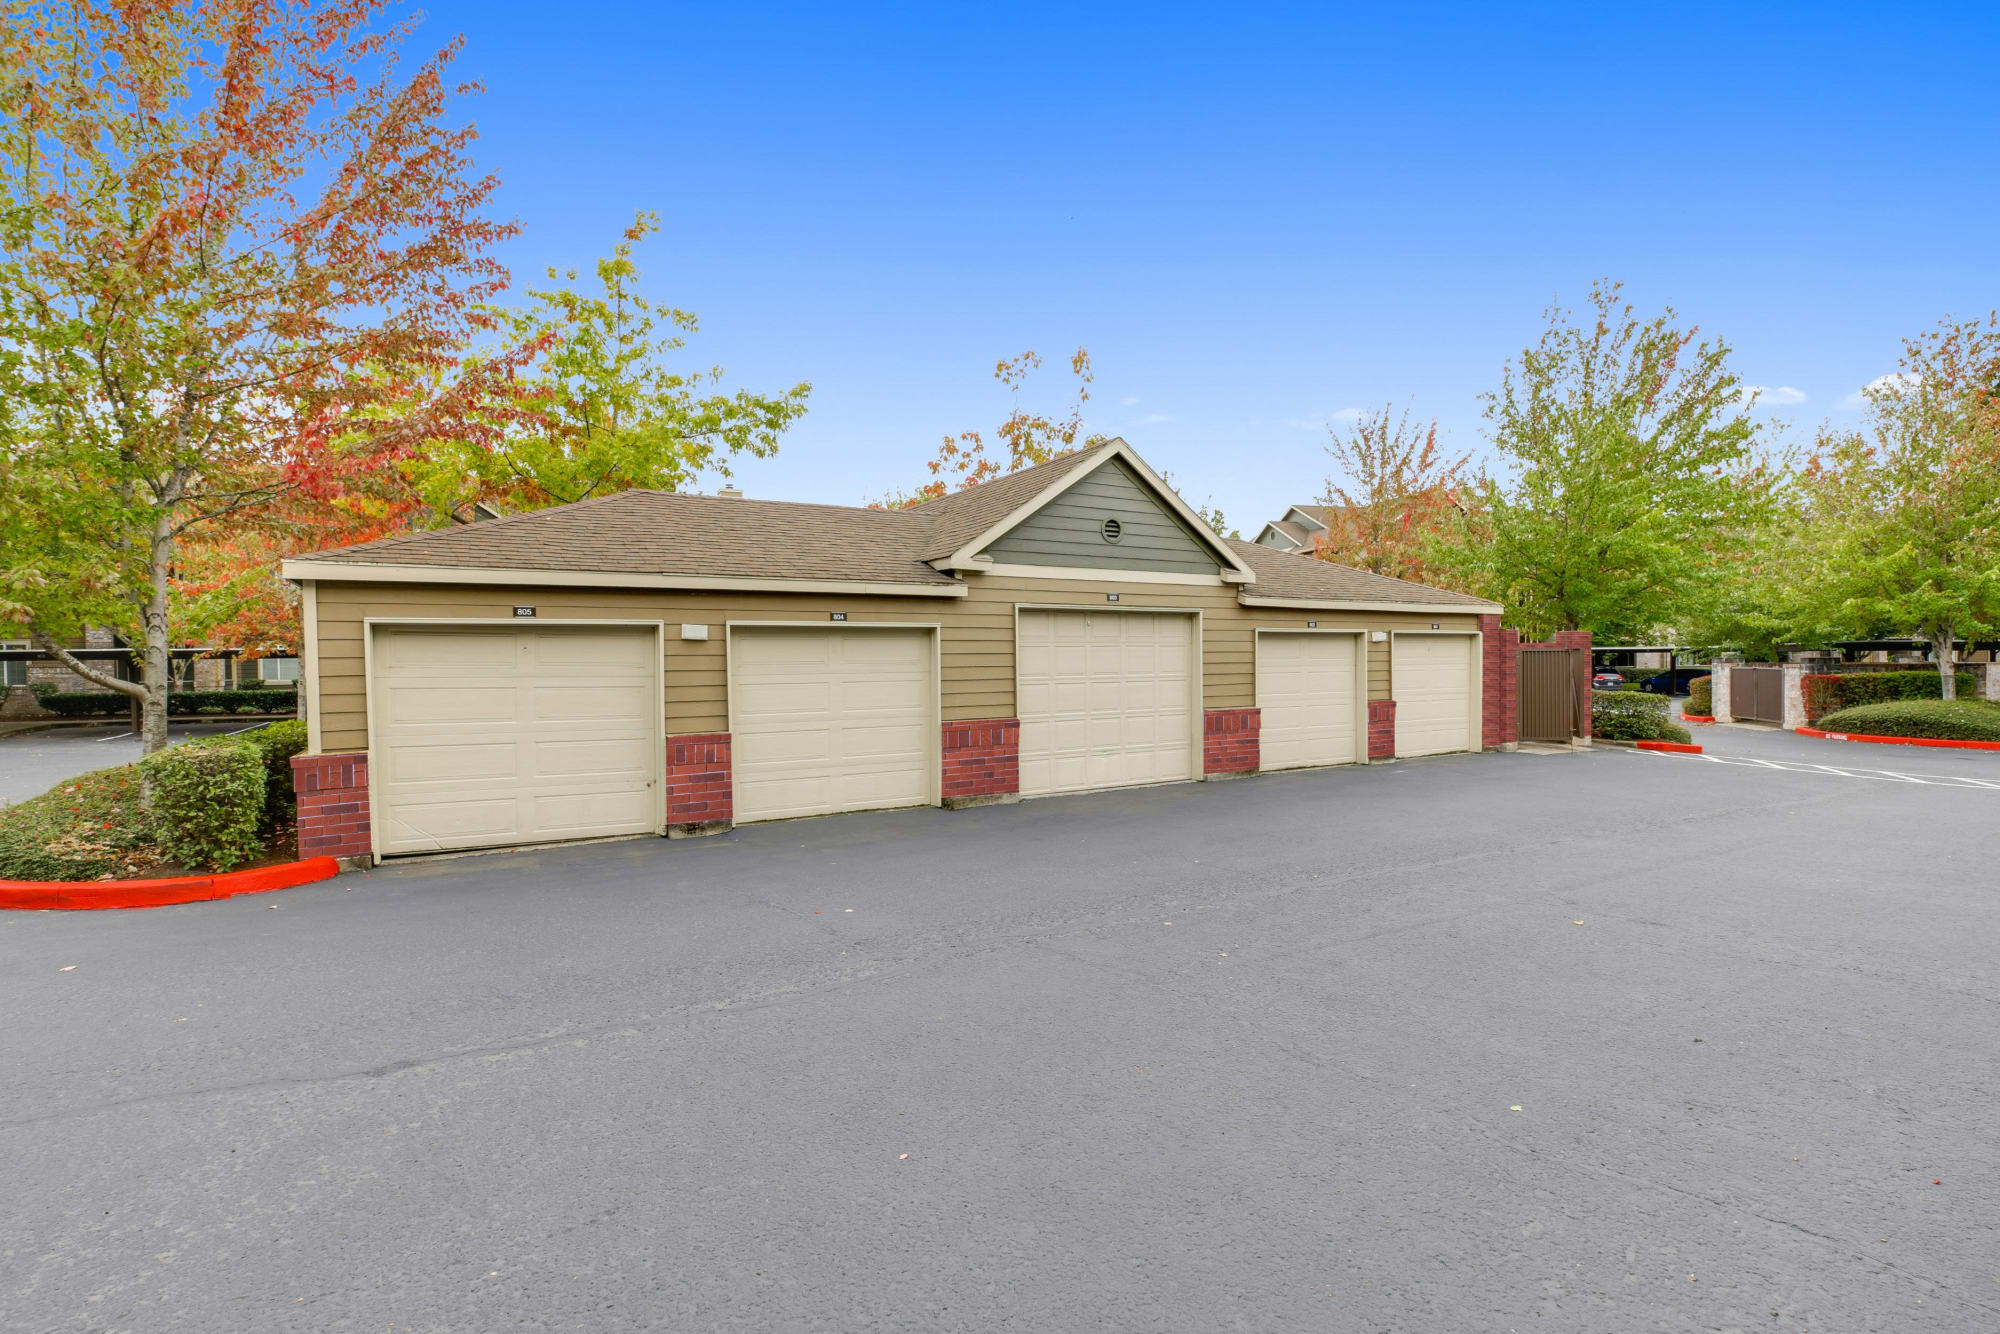 Garages at The Grove at Orenco Station in Hillsboro, Oregon